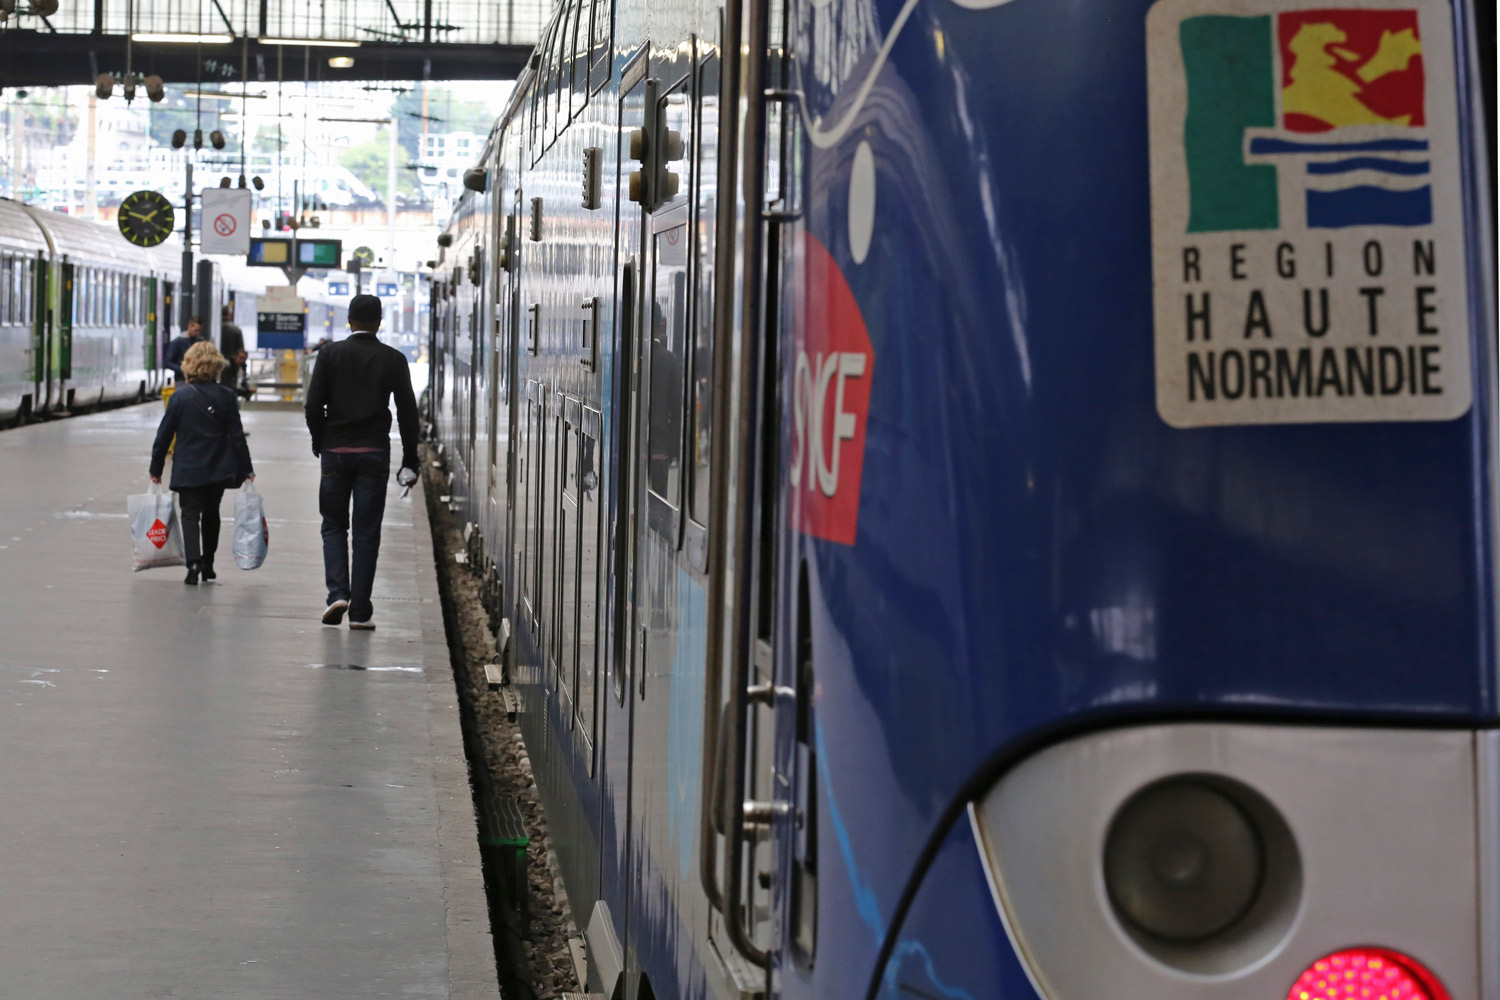 A Regional Express Train, or TER, is sationed along a platform at the Saint Lazare station in Paris, Wednesday May 21, 2014. (Remy de la Mauviniere / AP)